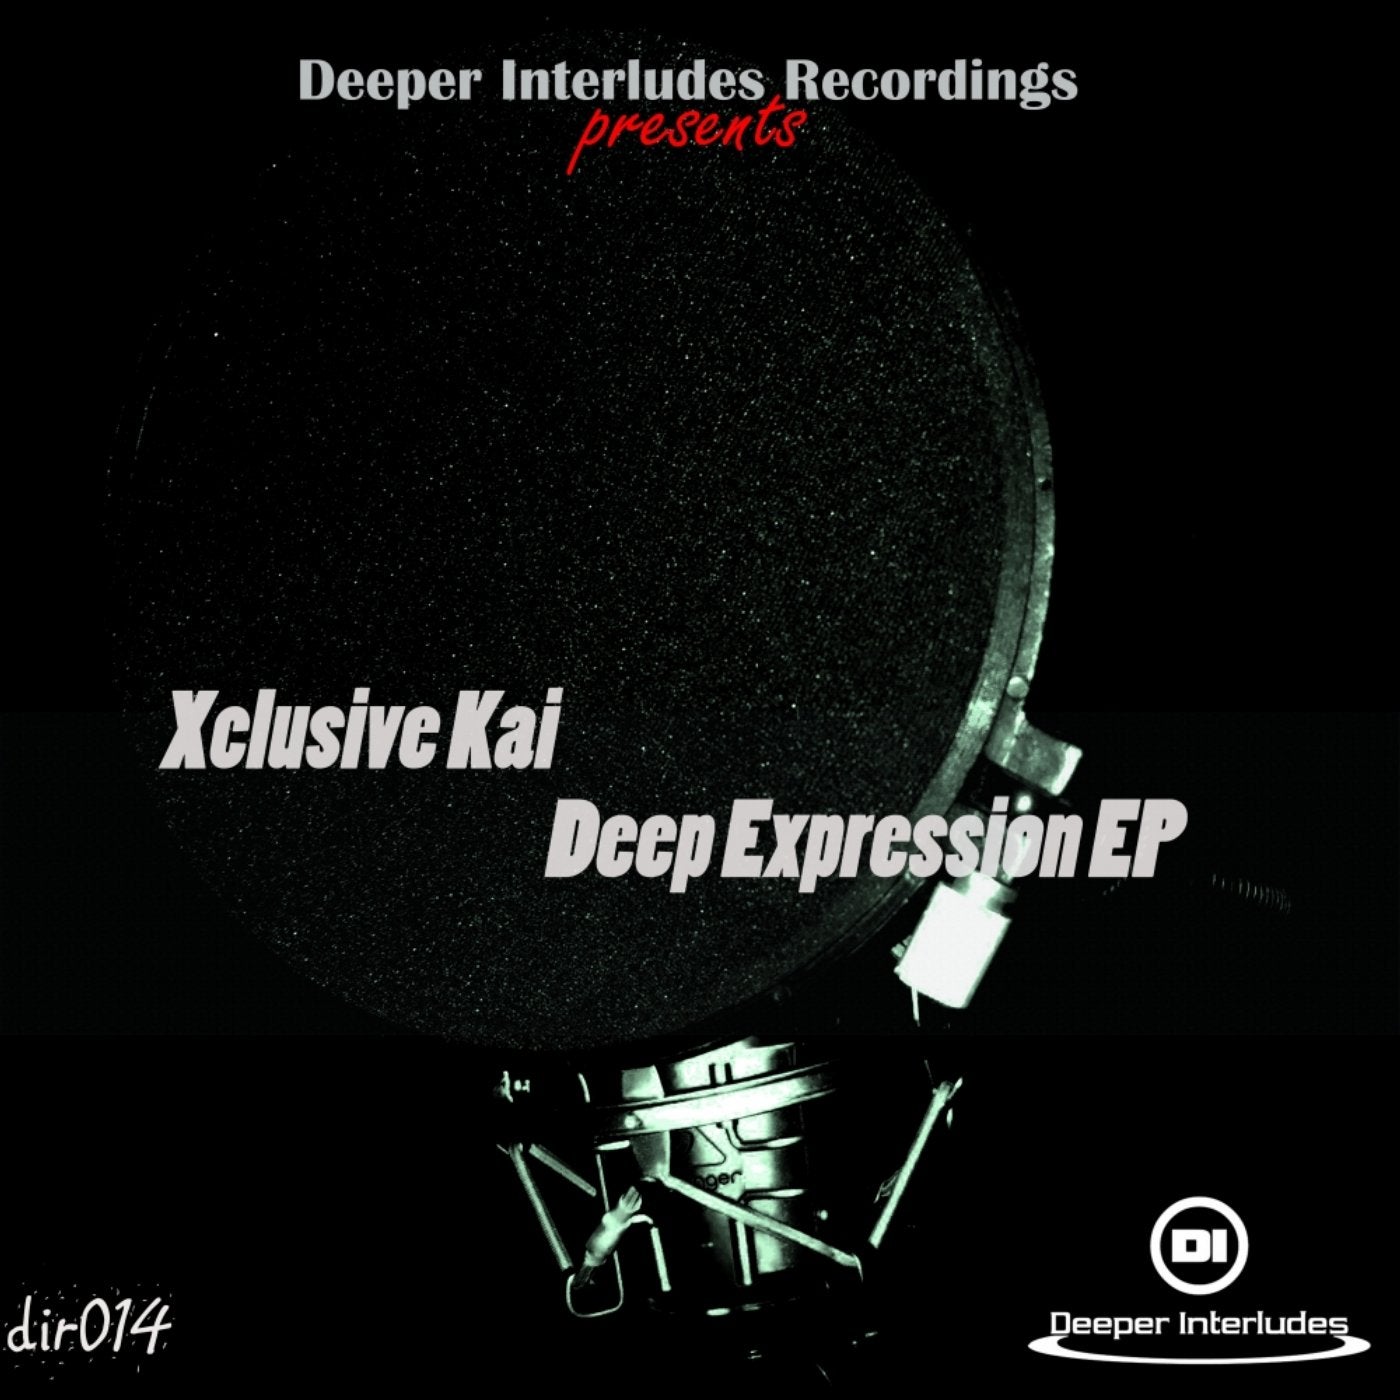 Deep Expression EP